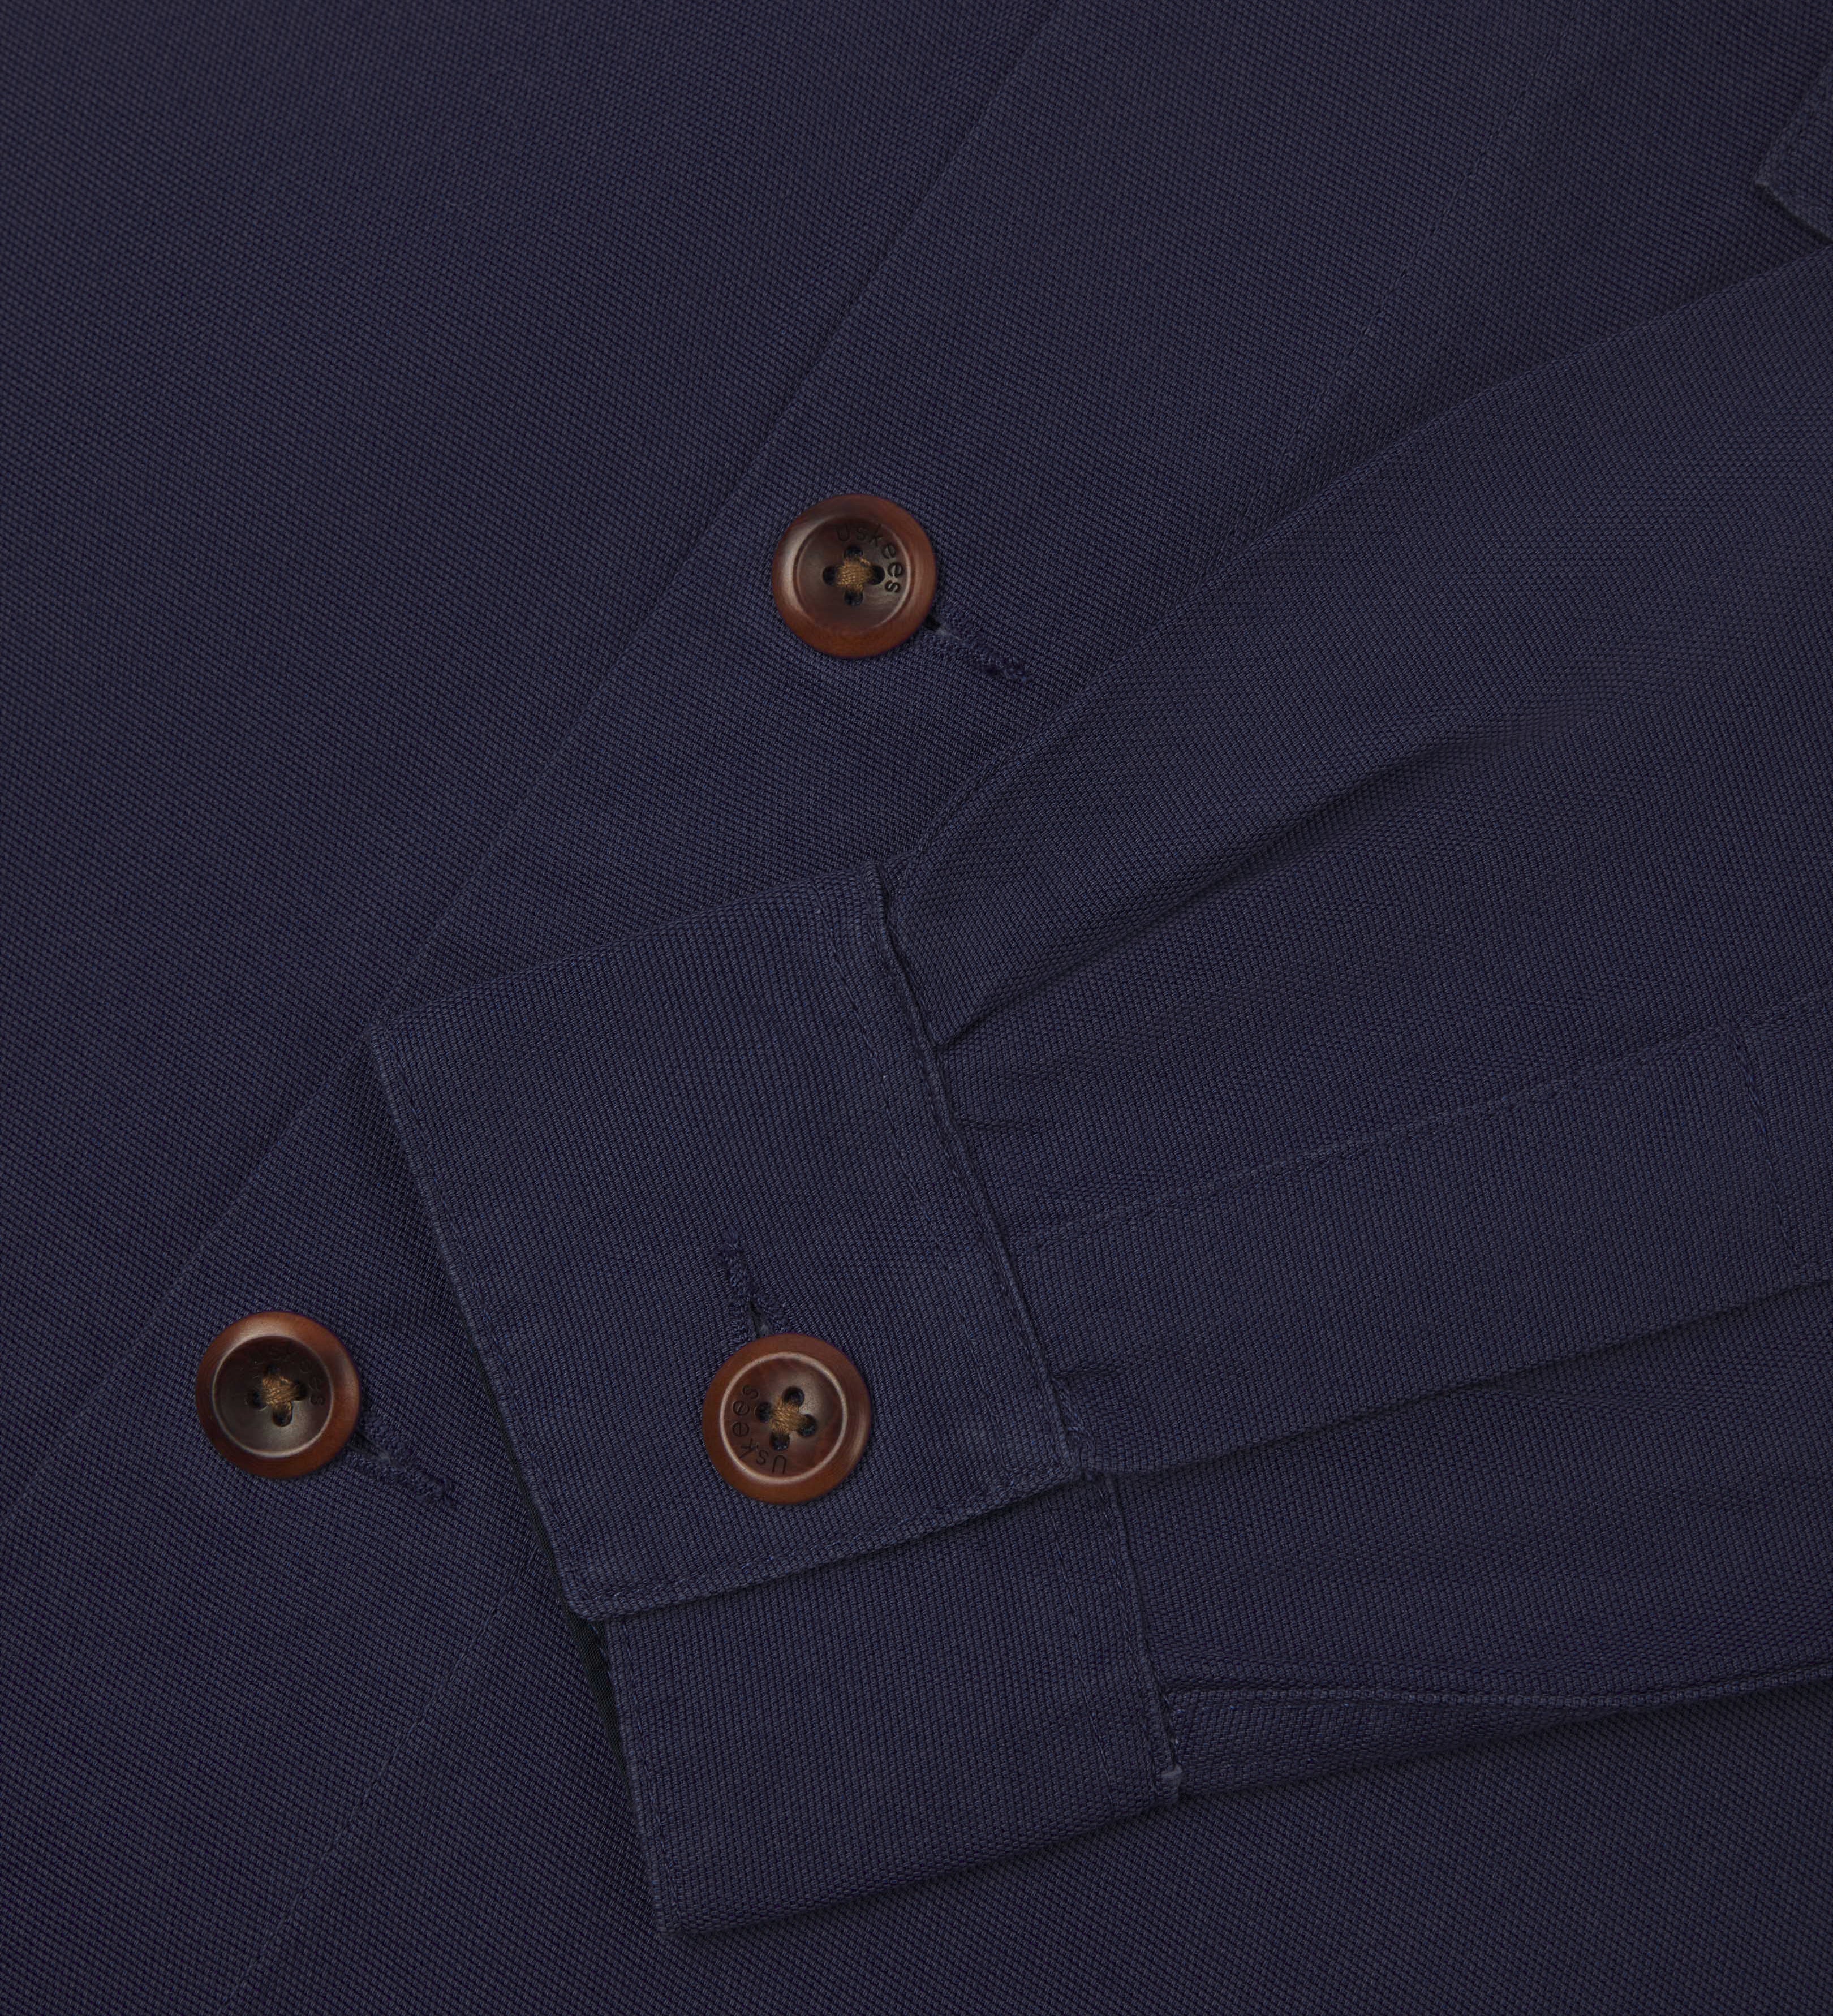 sleeve detail and corozo buttons.